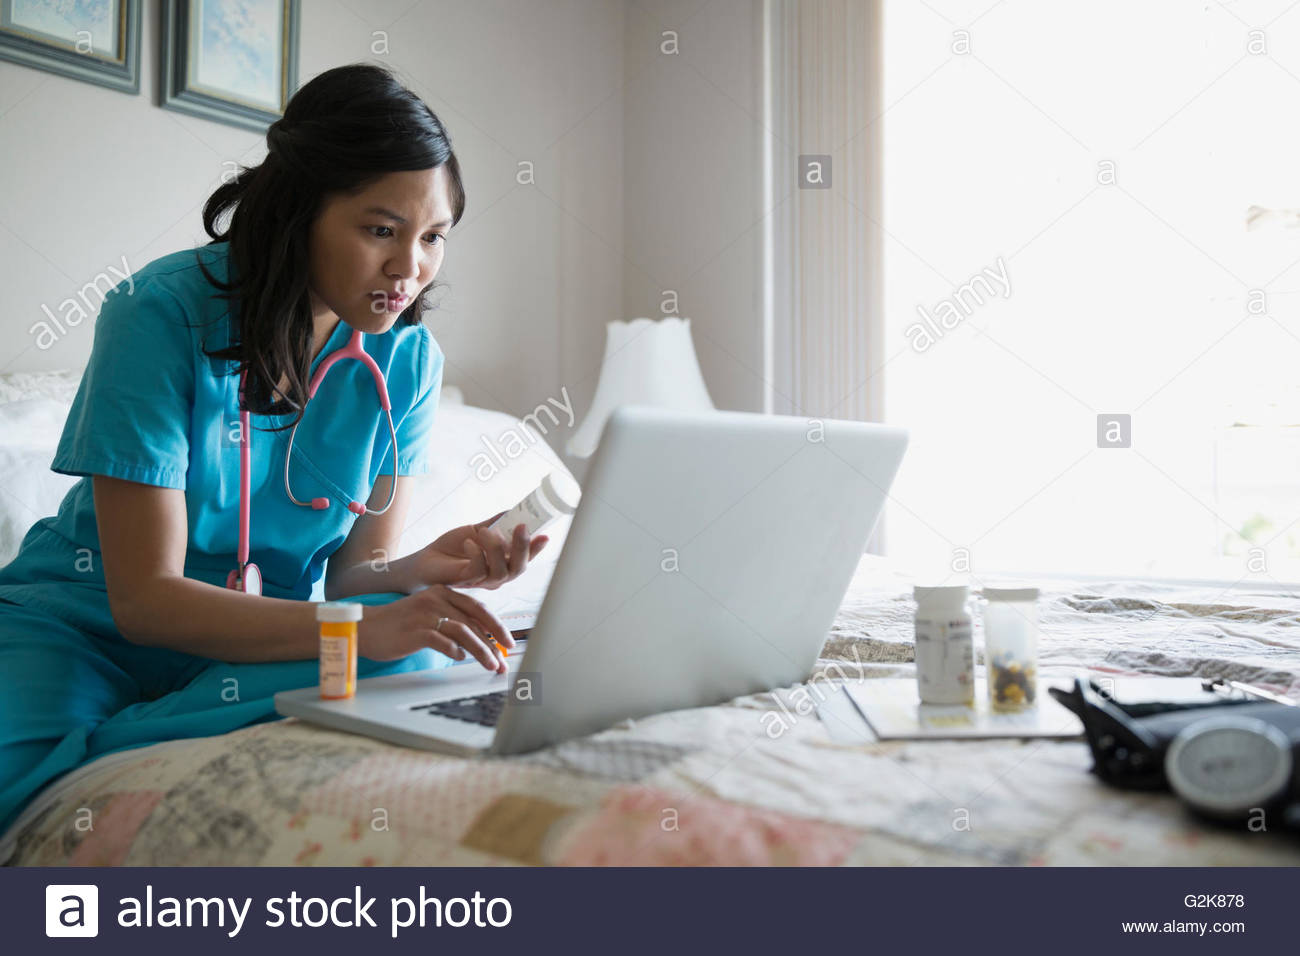 Home caregiver with prescriptions using laptop on bed Stock Photo